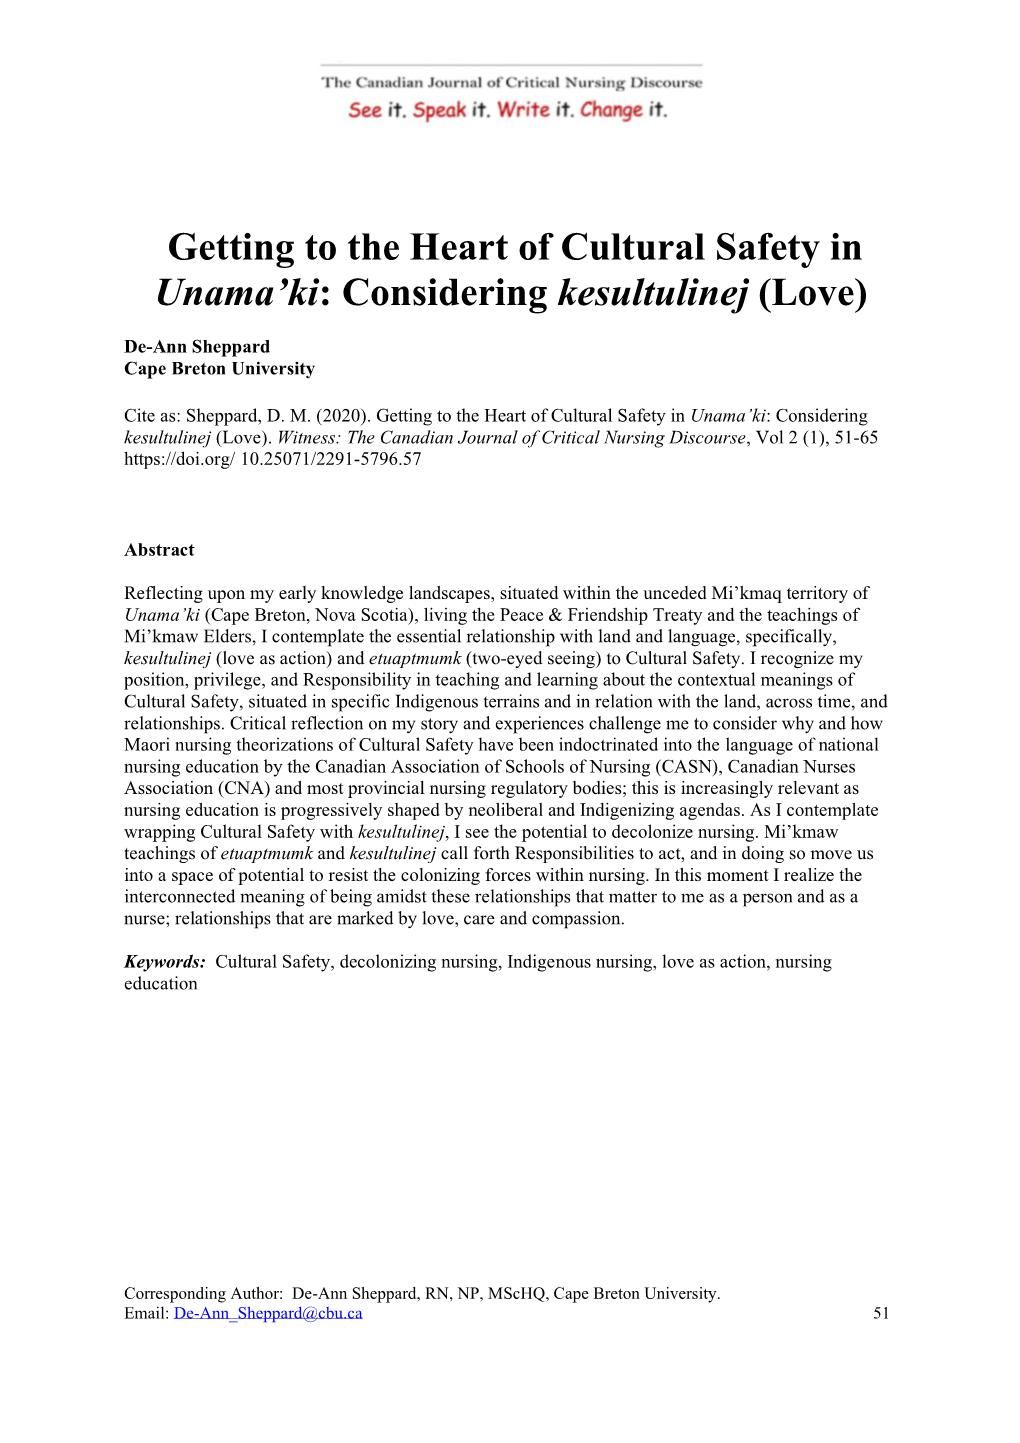 Getting to the Heart of Cultural Safety in Unama'ki